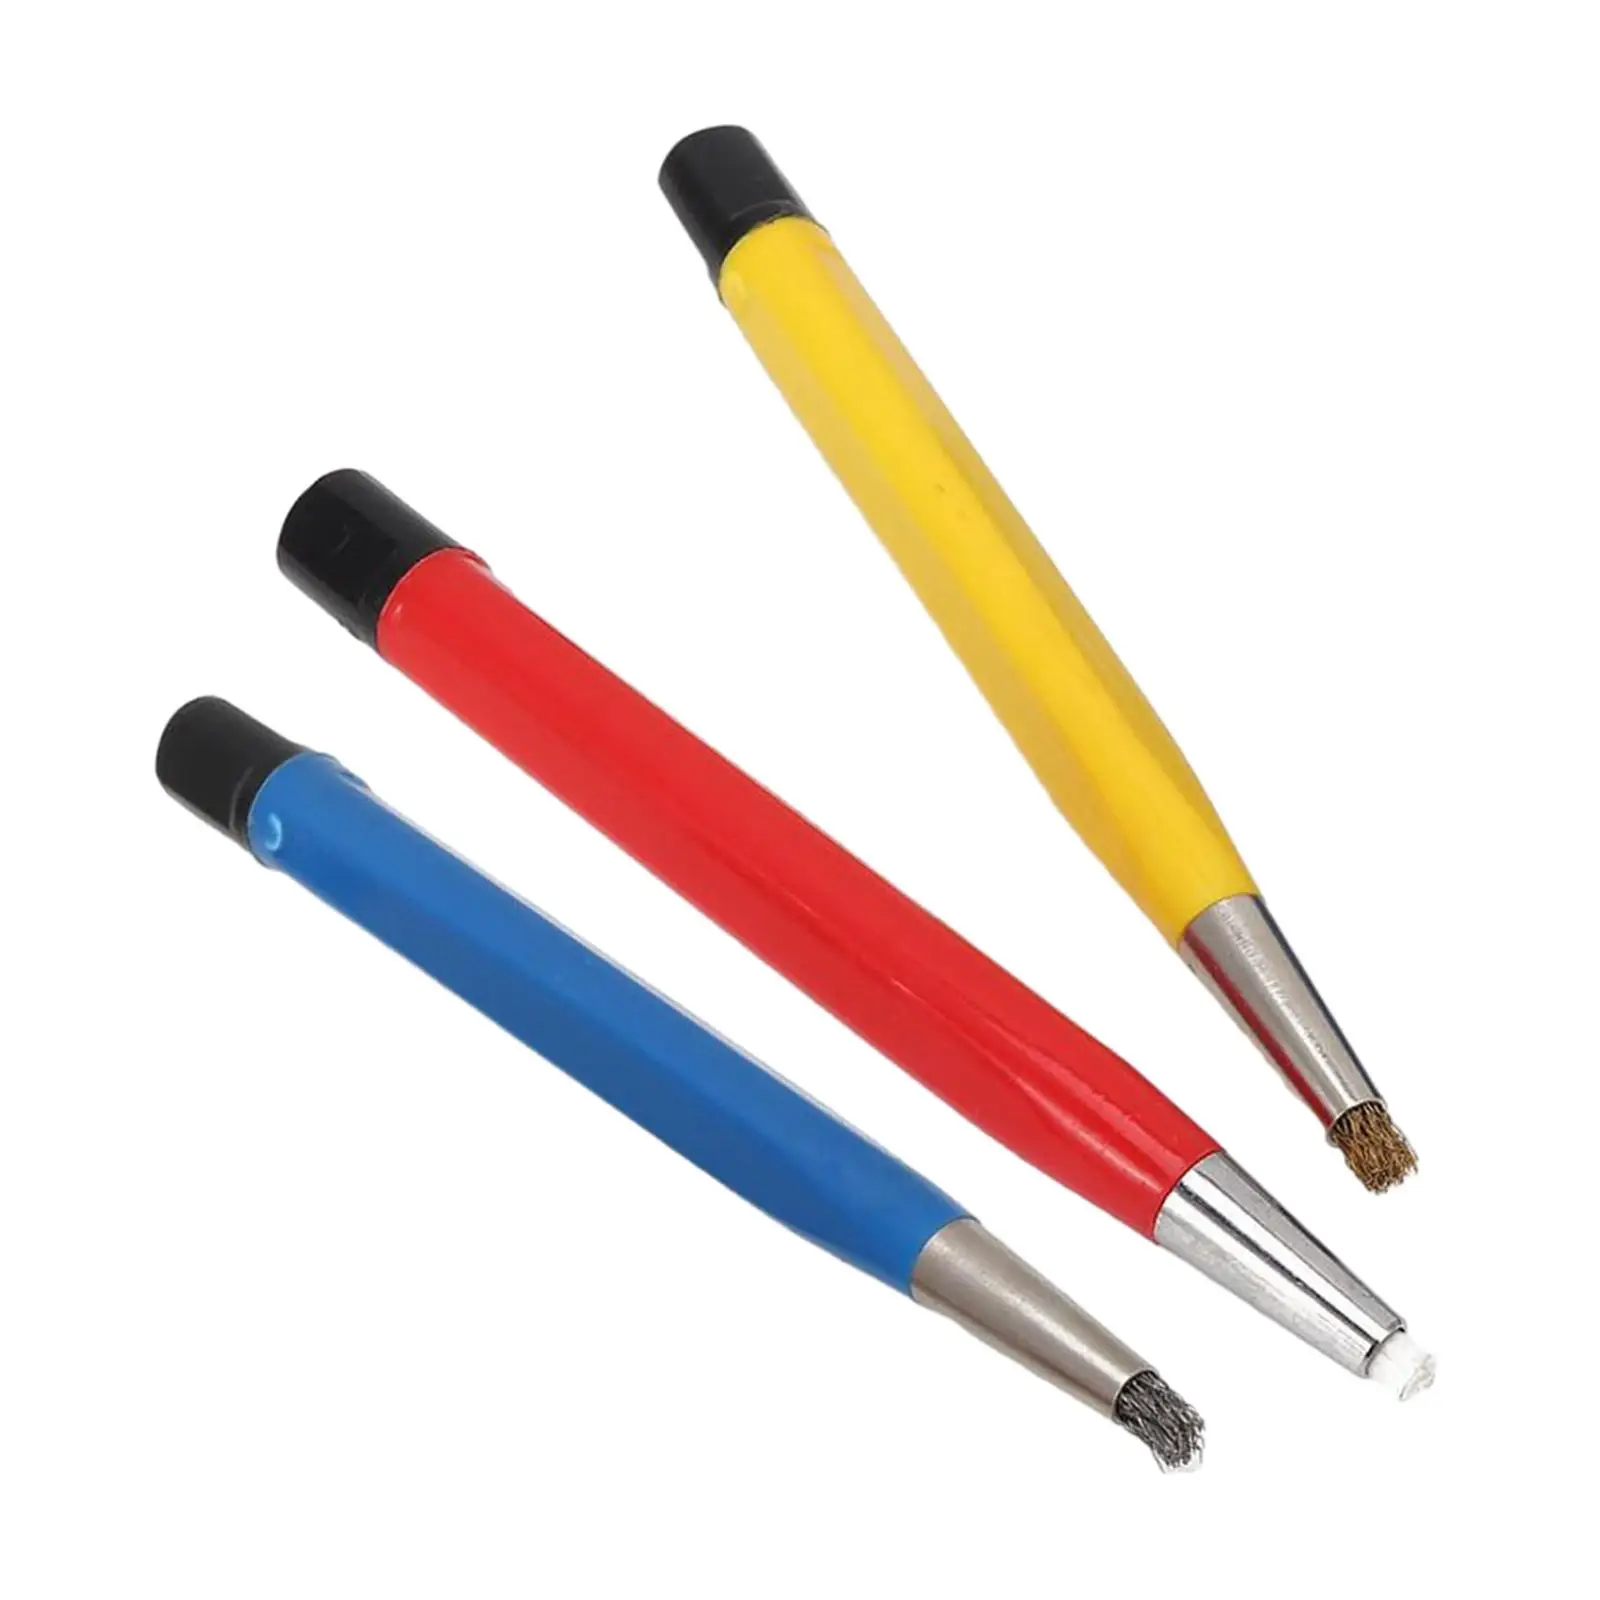 3Pcs Scratch Brush Pen Set Removing Corrosion Rust Clean Tool Watch Repair Dirt Remover for Jewelry Electrical Circuit Boards